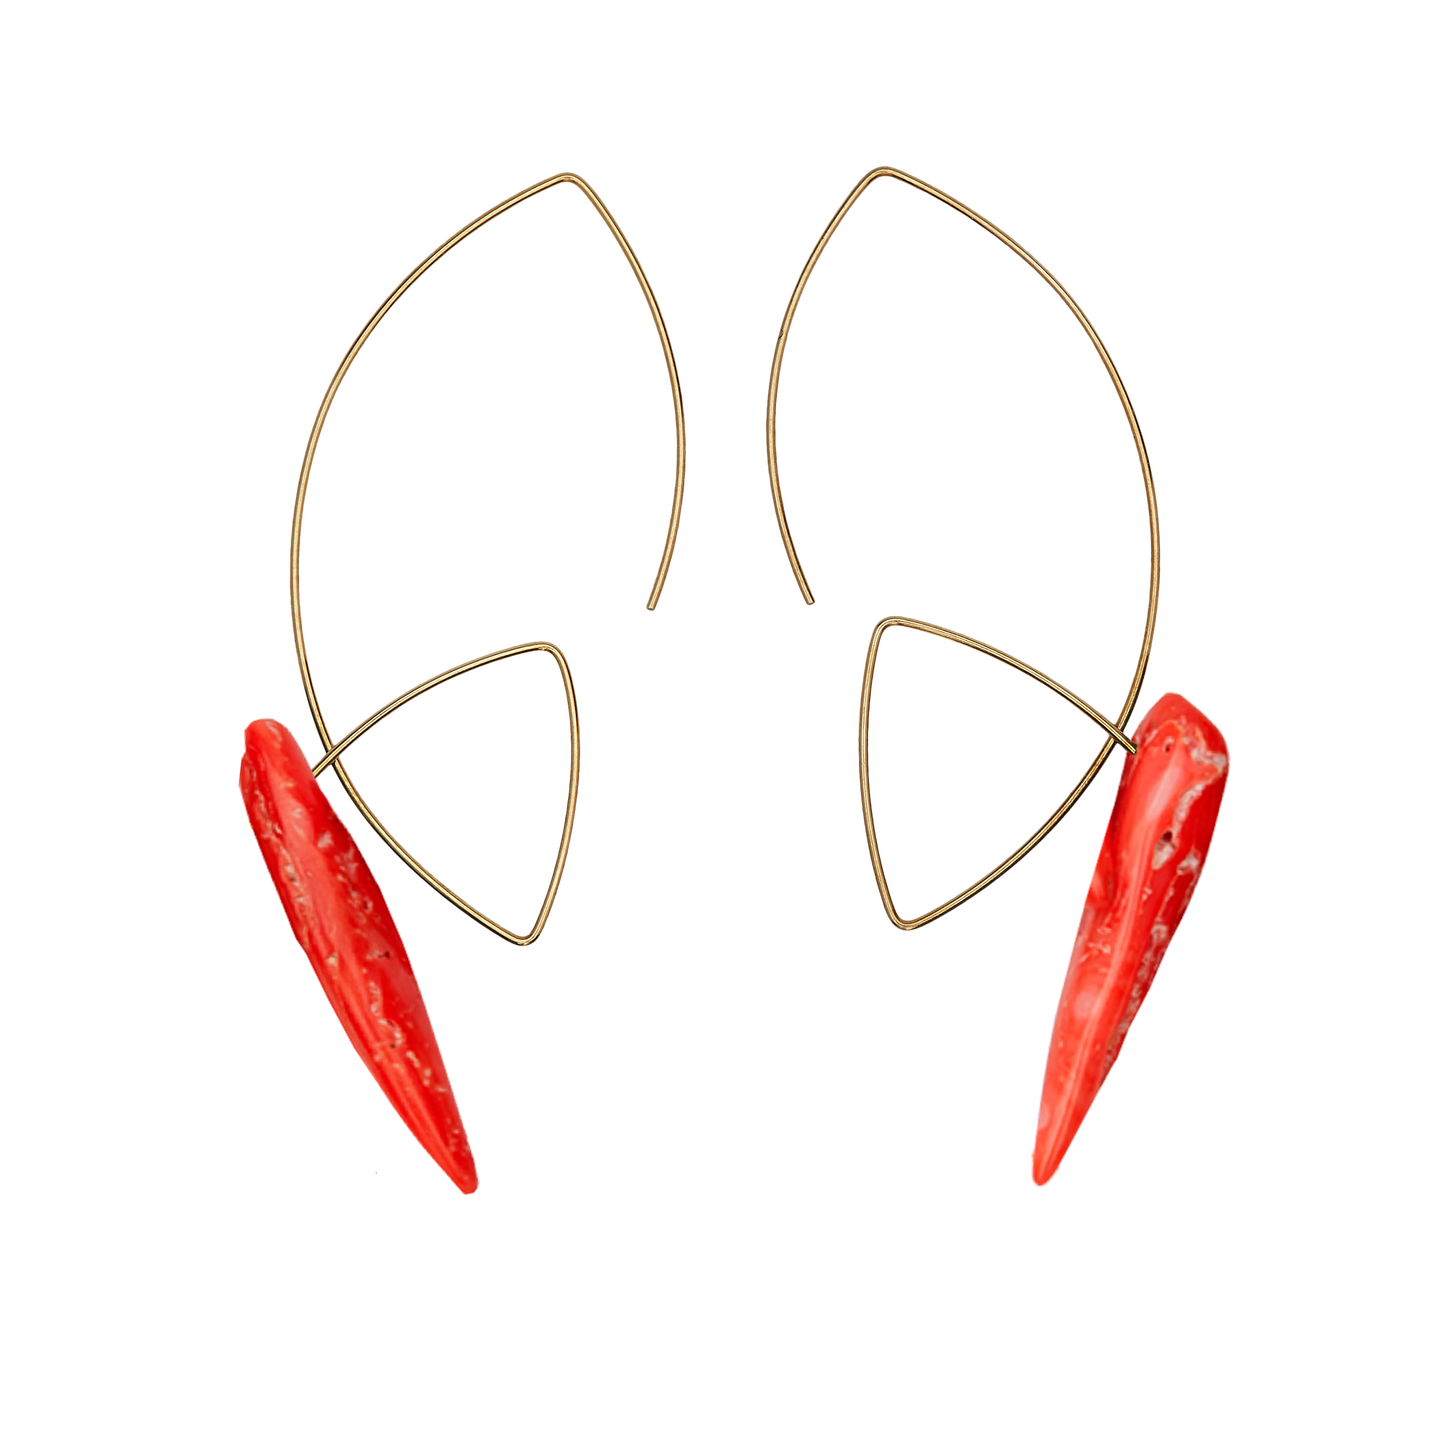 Large Angled Loop Earrings with Gemstones/Bamboo Coral (sustainably produced)